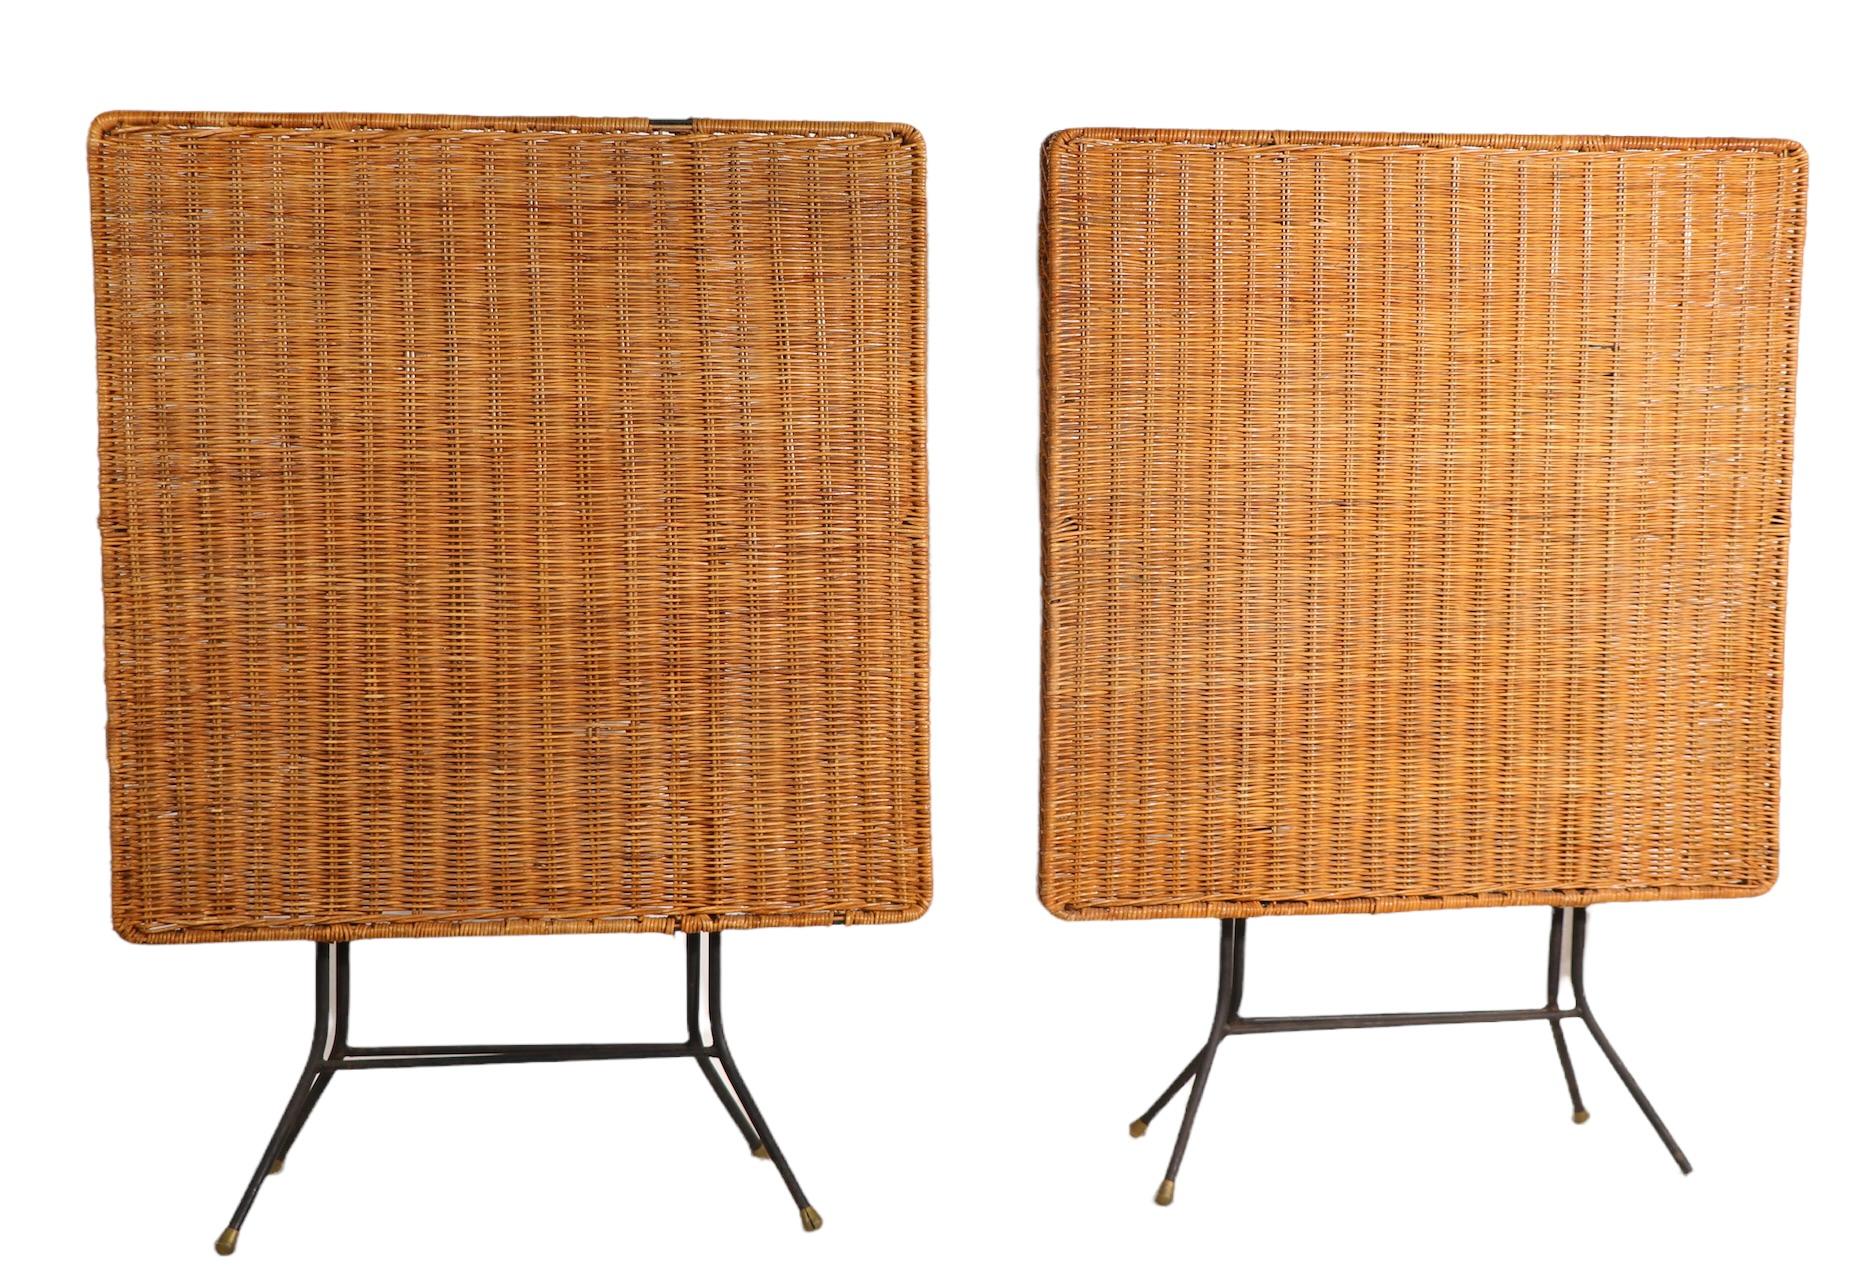 Chic folding card, cafe, or dining table(s) by California designed Danny Ho Fong. The tops are of woven wicker, the bases are tubular metal. One table has some loss to the wicker top, one is undamaged, both may be missing plastic feet glides. We are